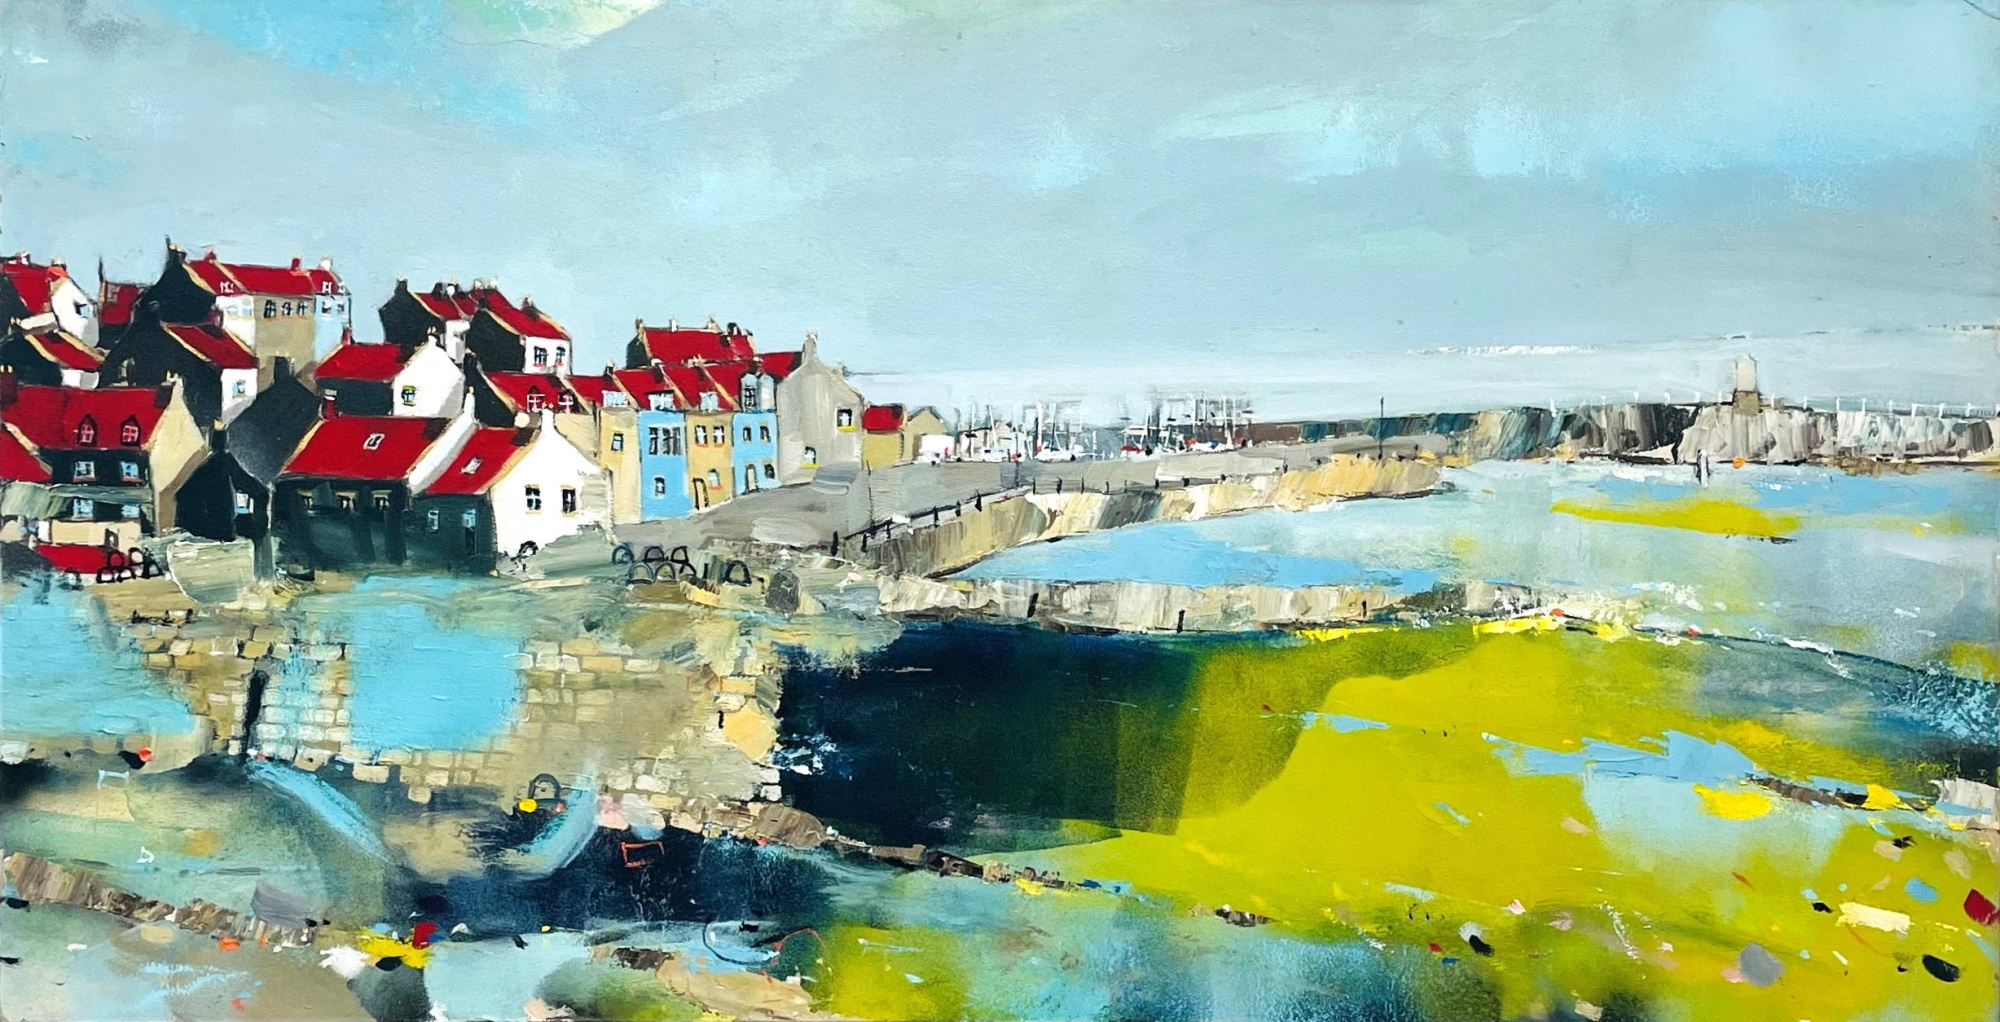 'Pittenweem Harbour' by artist Rob Shaw